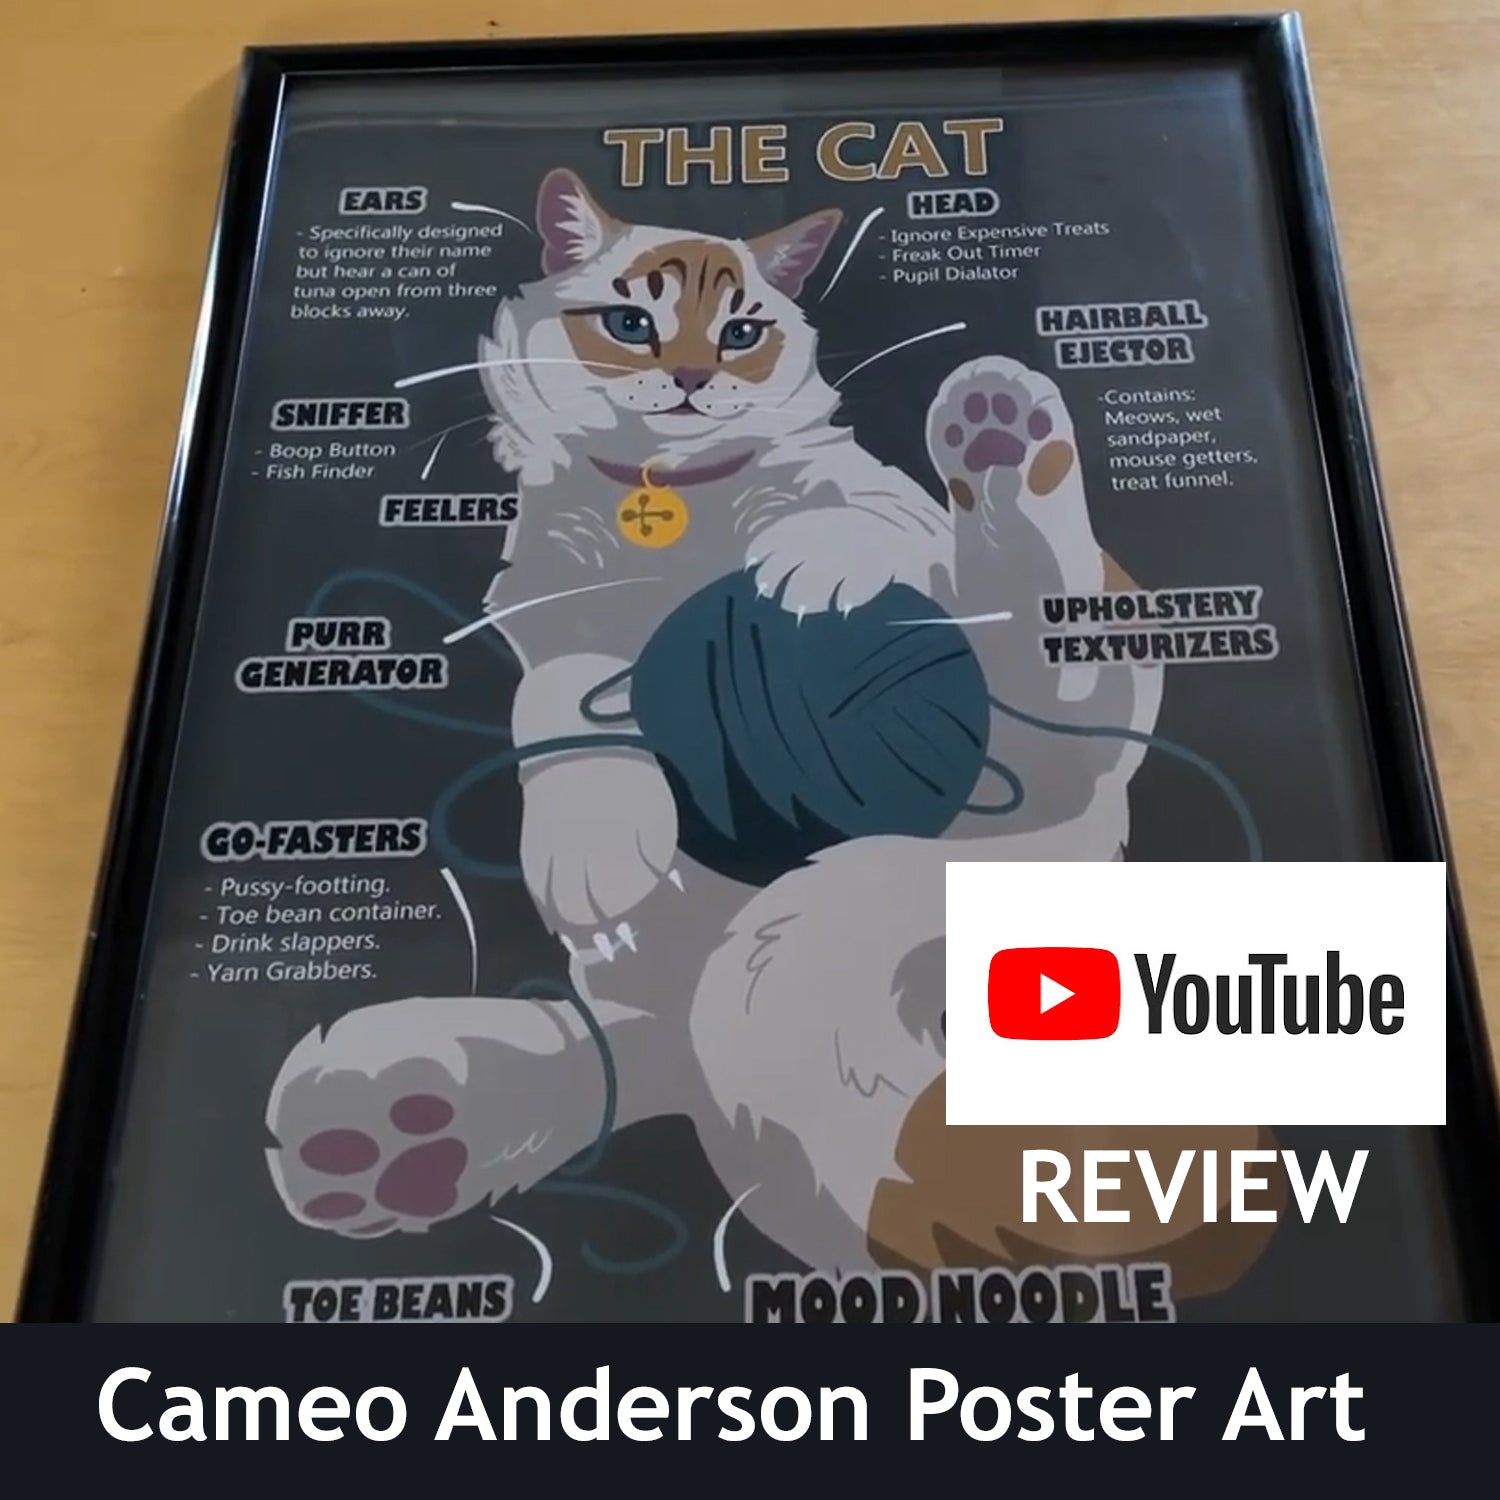 Load video: A client bought a poster and reviewed it with video showing the quality. That was awesome of her. I didn&#39;t ask for it, so that is more valuable. Thank you for looking.